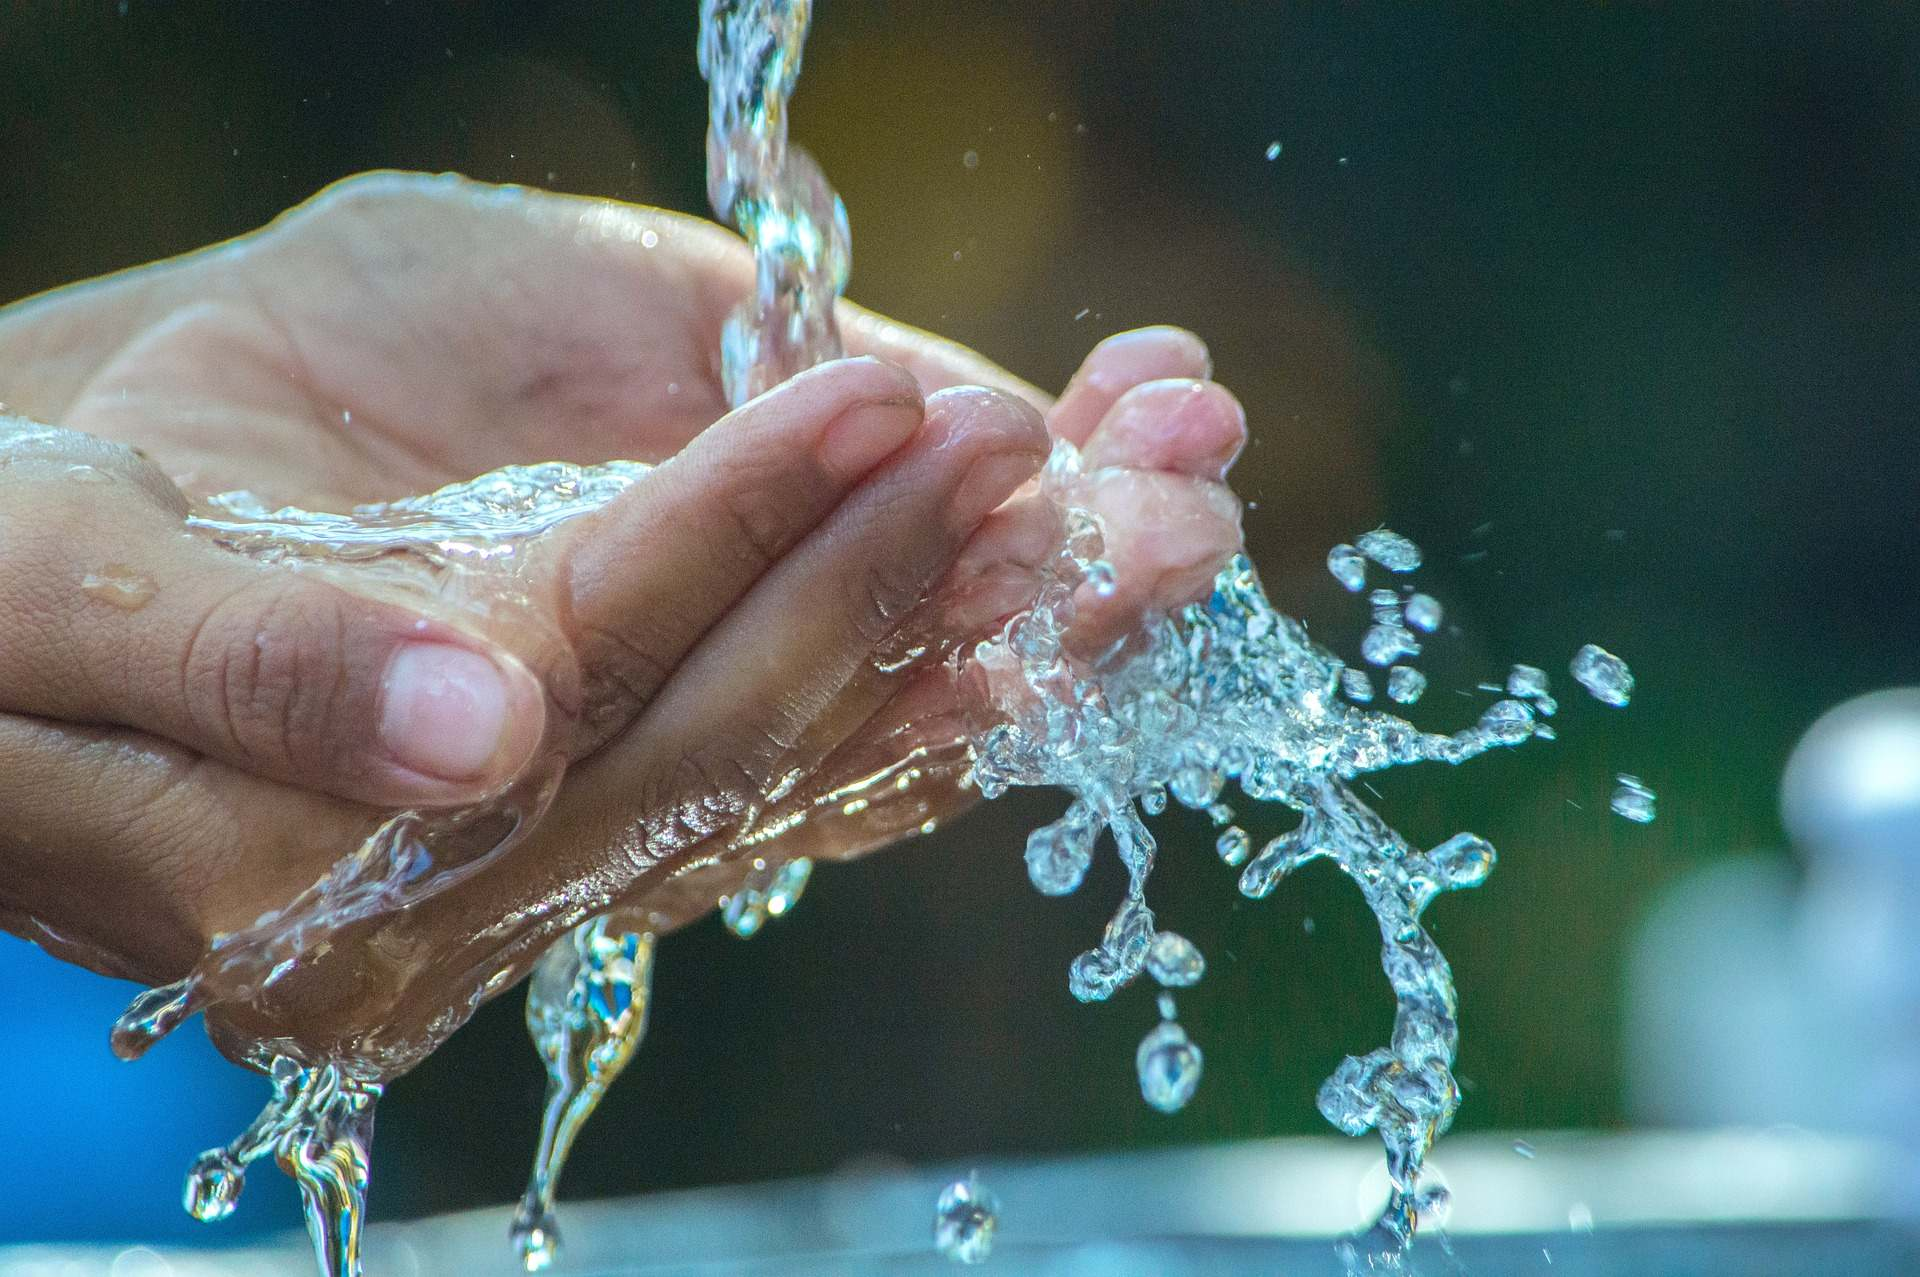 Water flows into hands